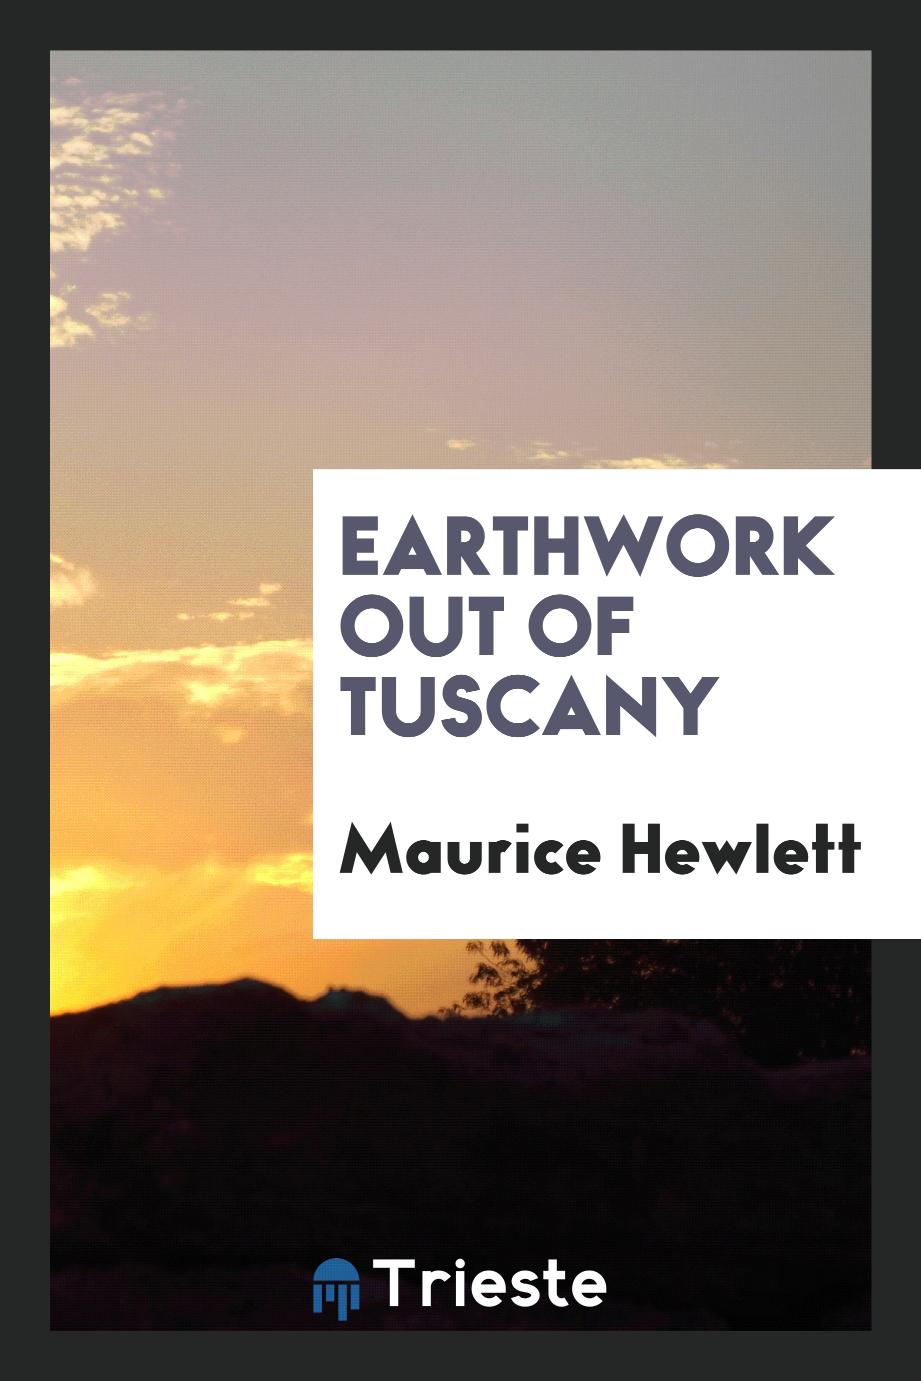 Earthwork out of Tuscany